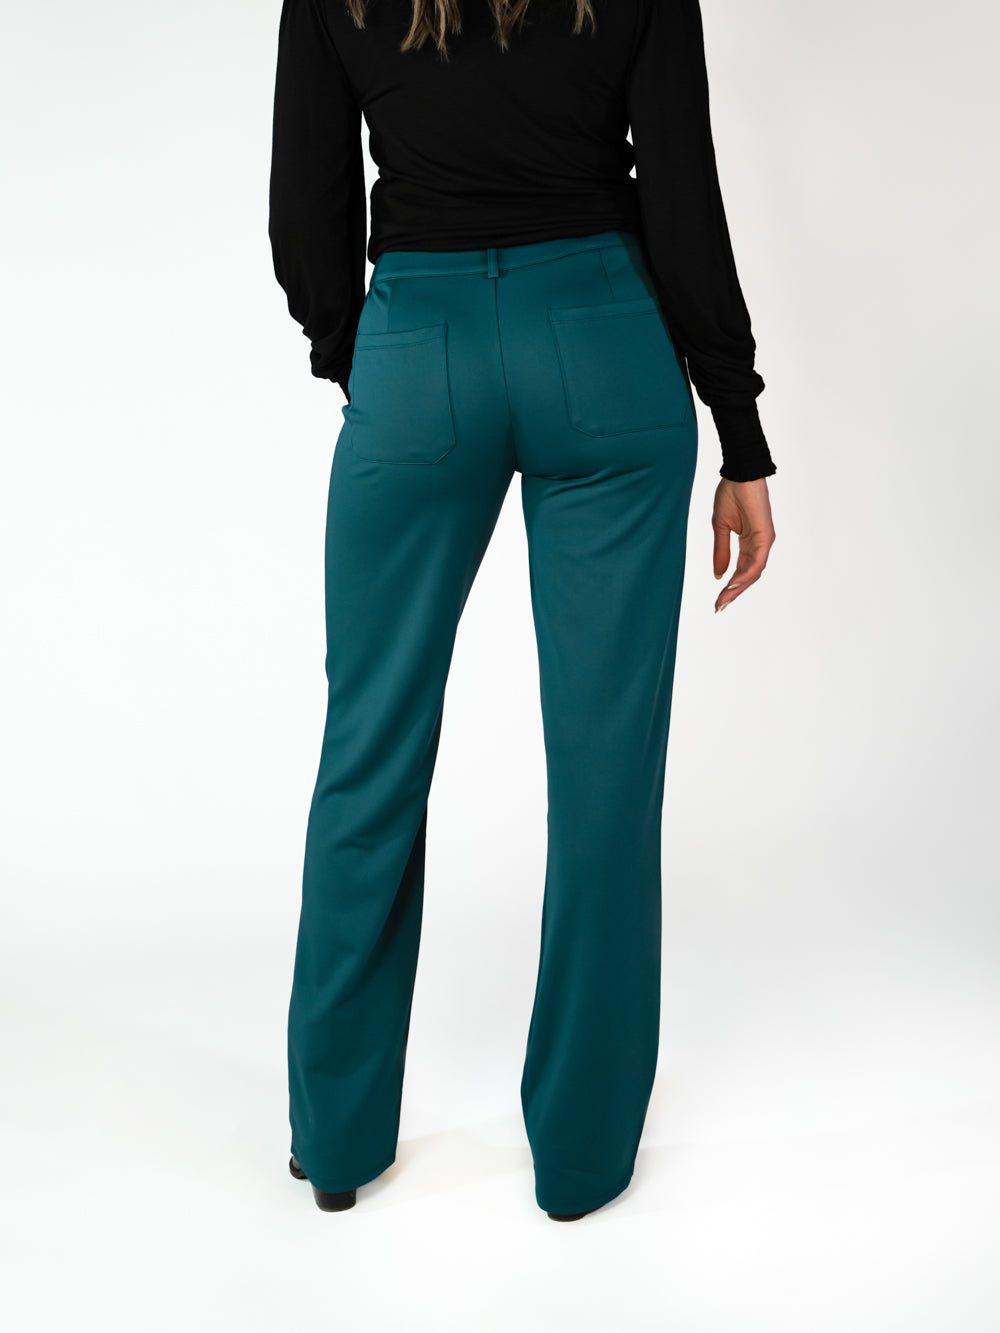 Women's Designer Flared Trousers | Sale up to 70% off | THE OUTNET